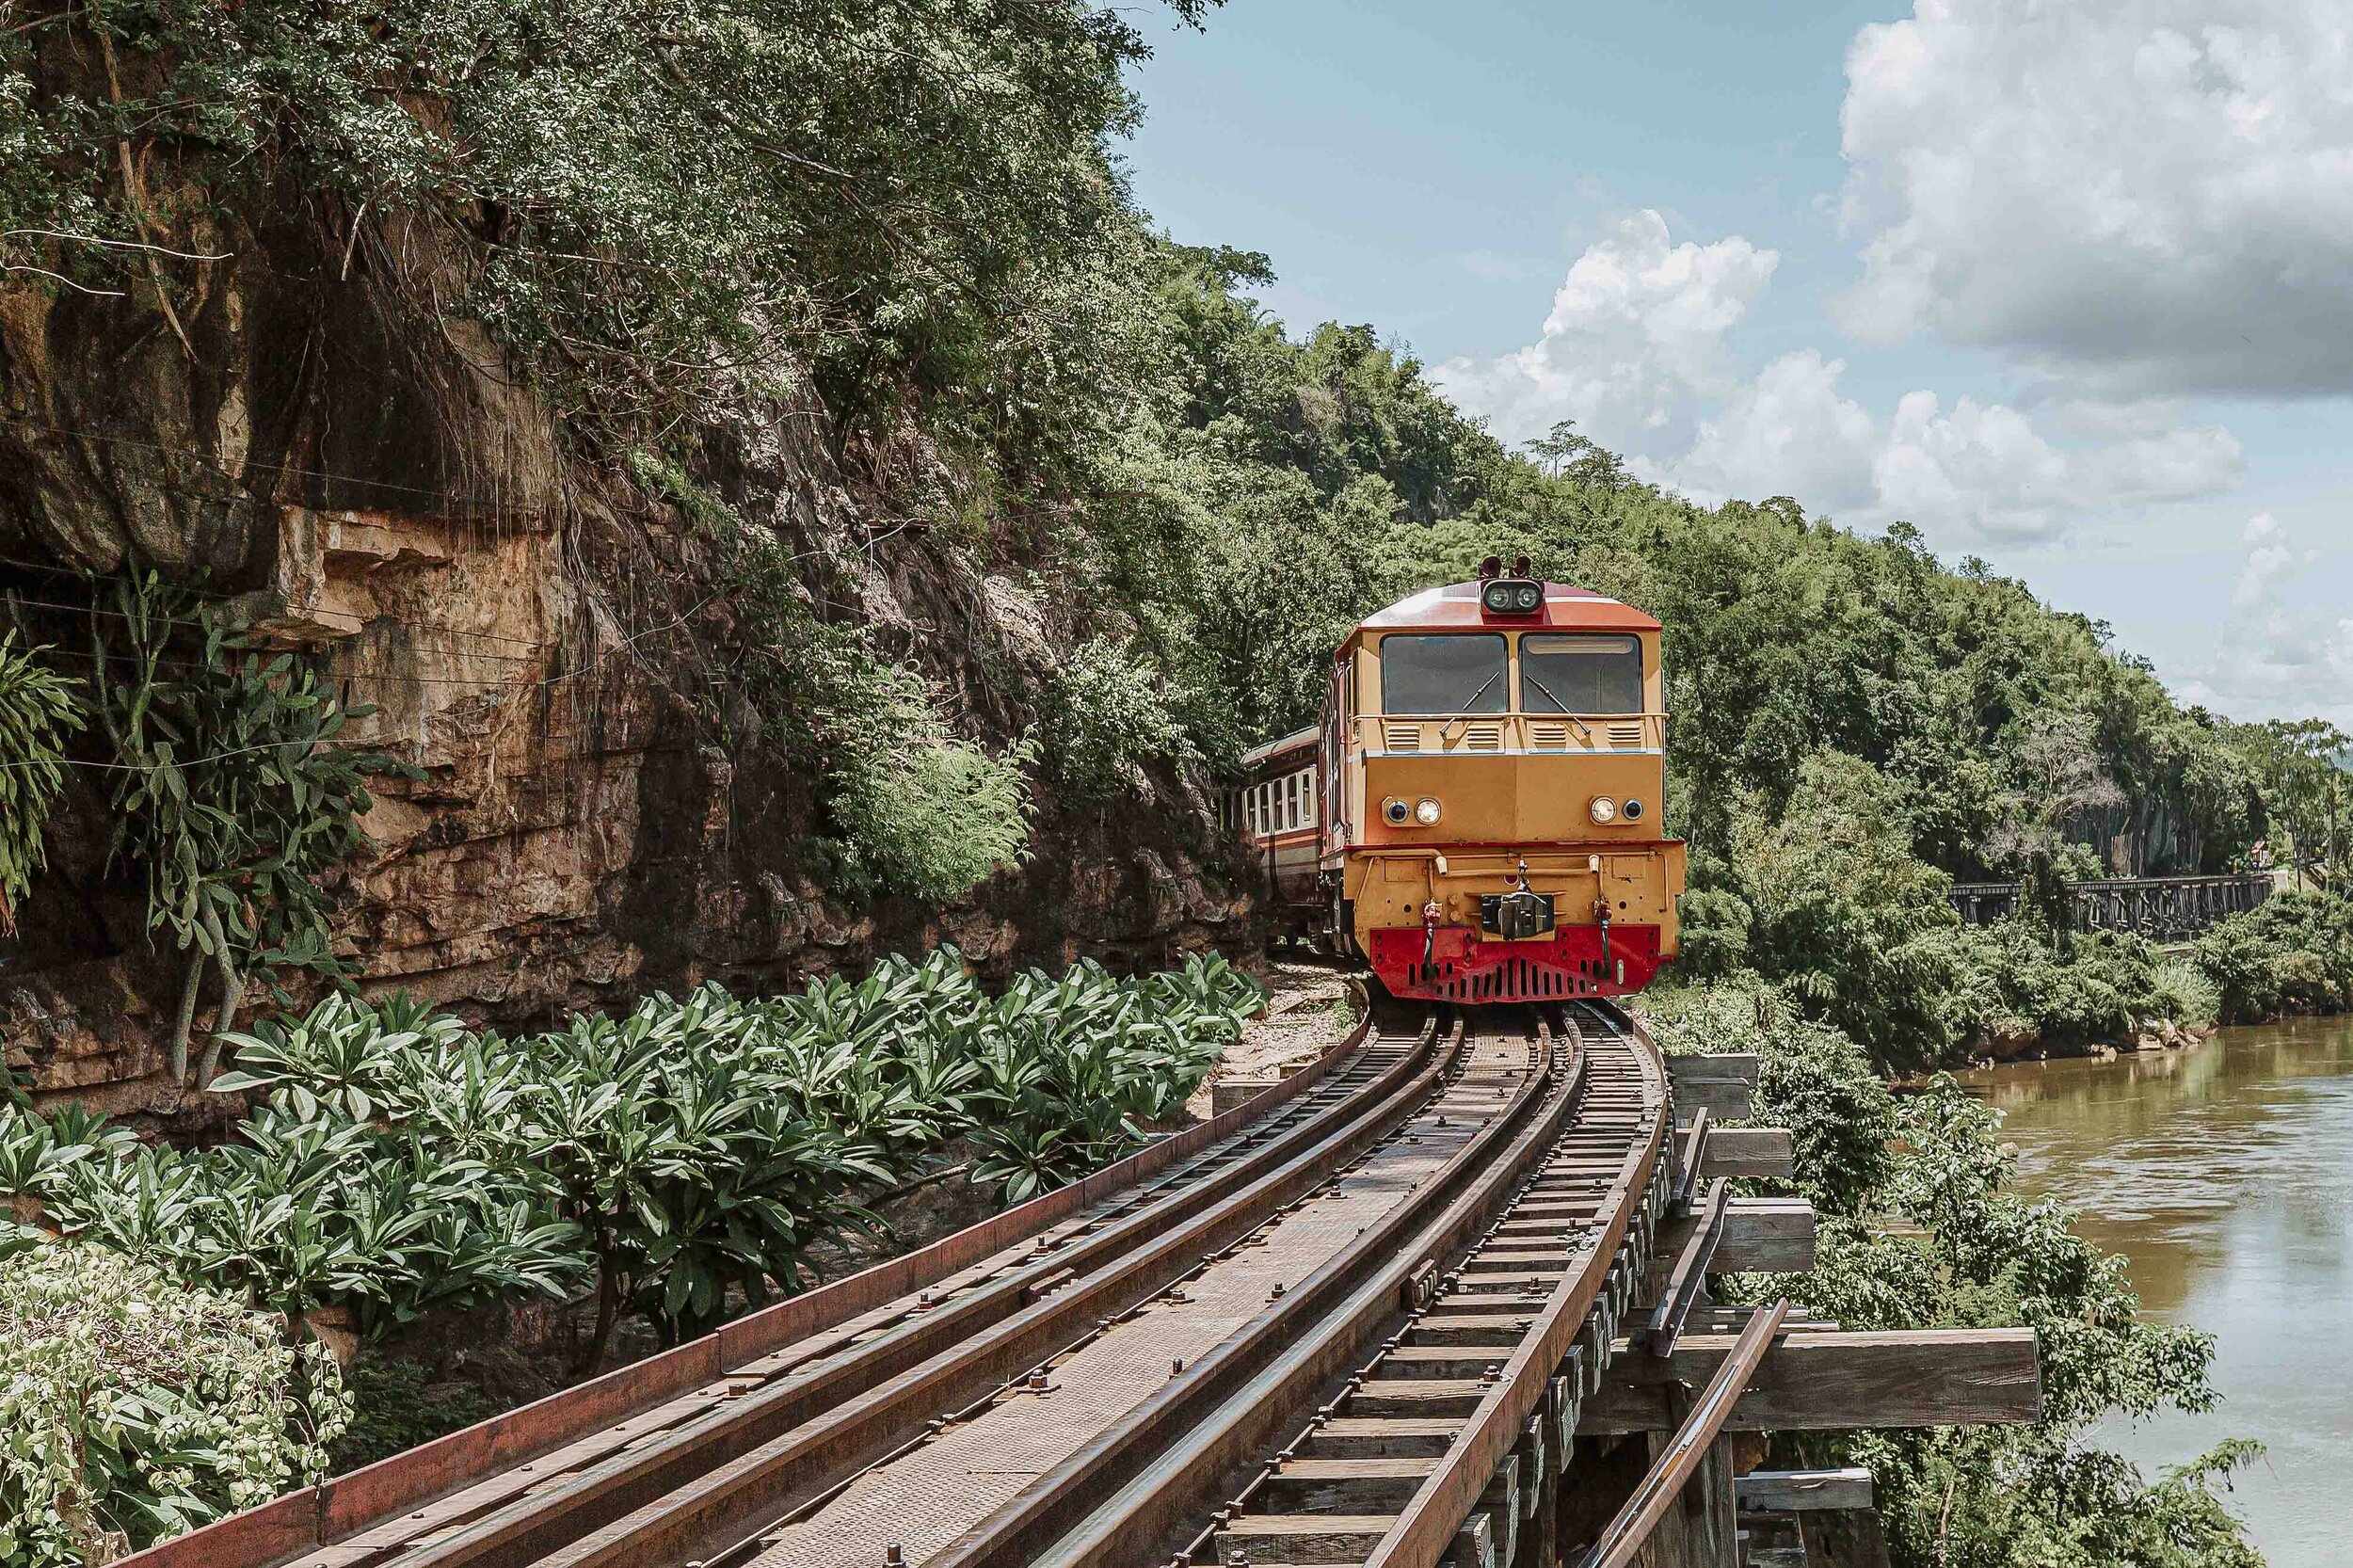 A yellow train passing on the tracks by the river in Kanchanaburi - Things to do on your 7 days in thailand itinerary